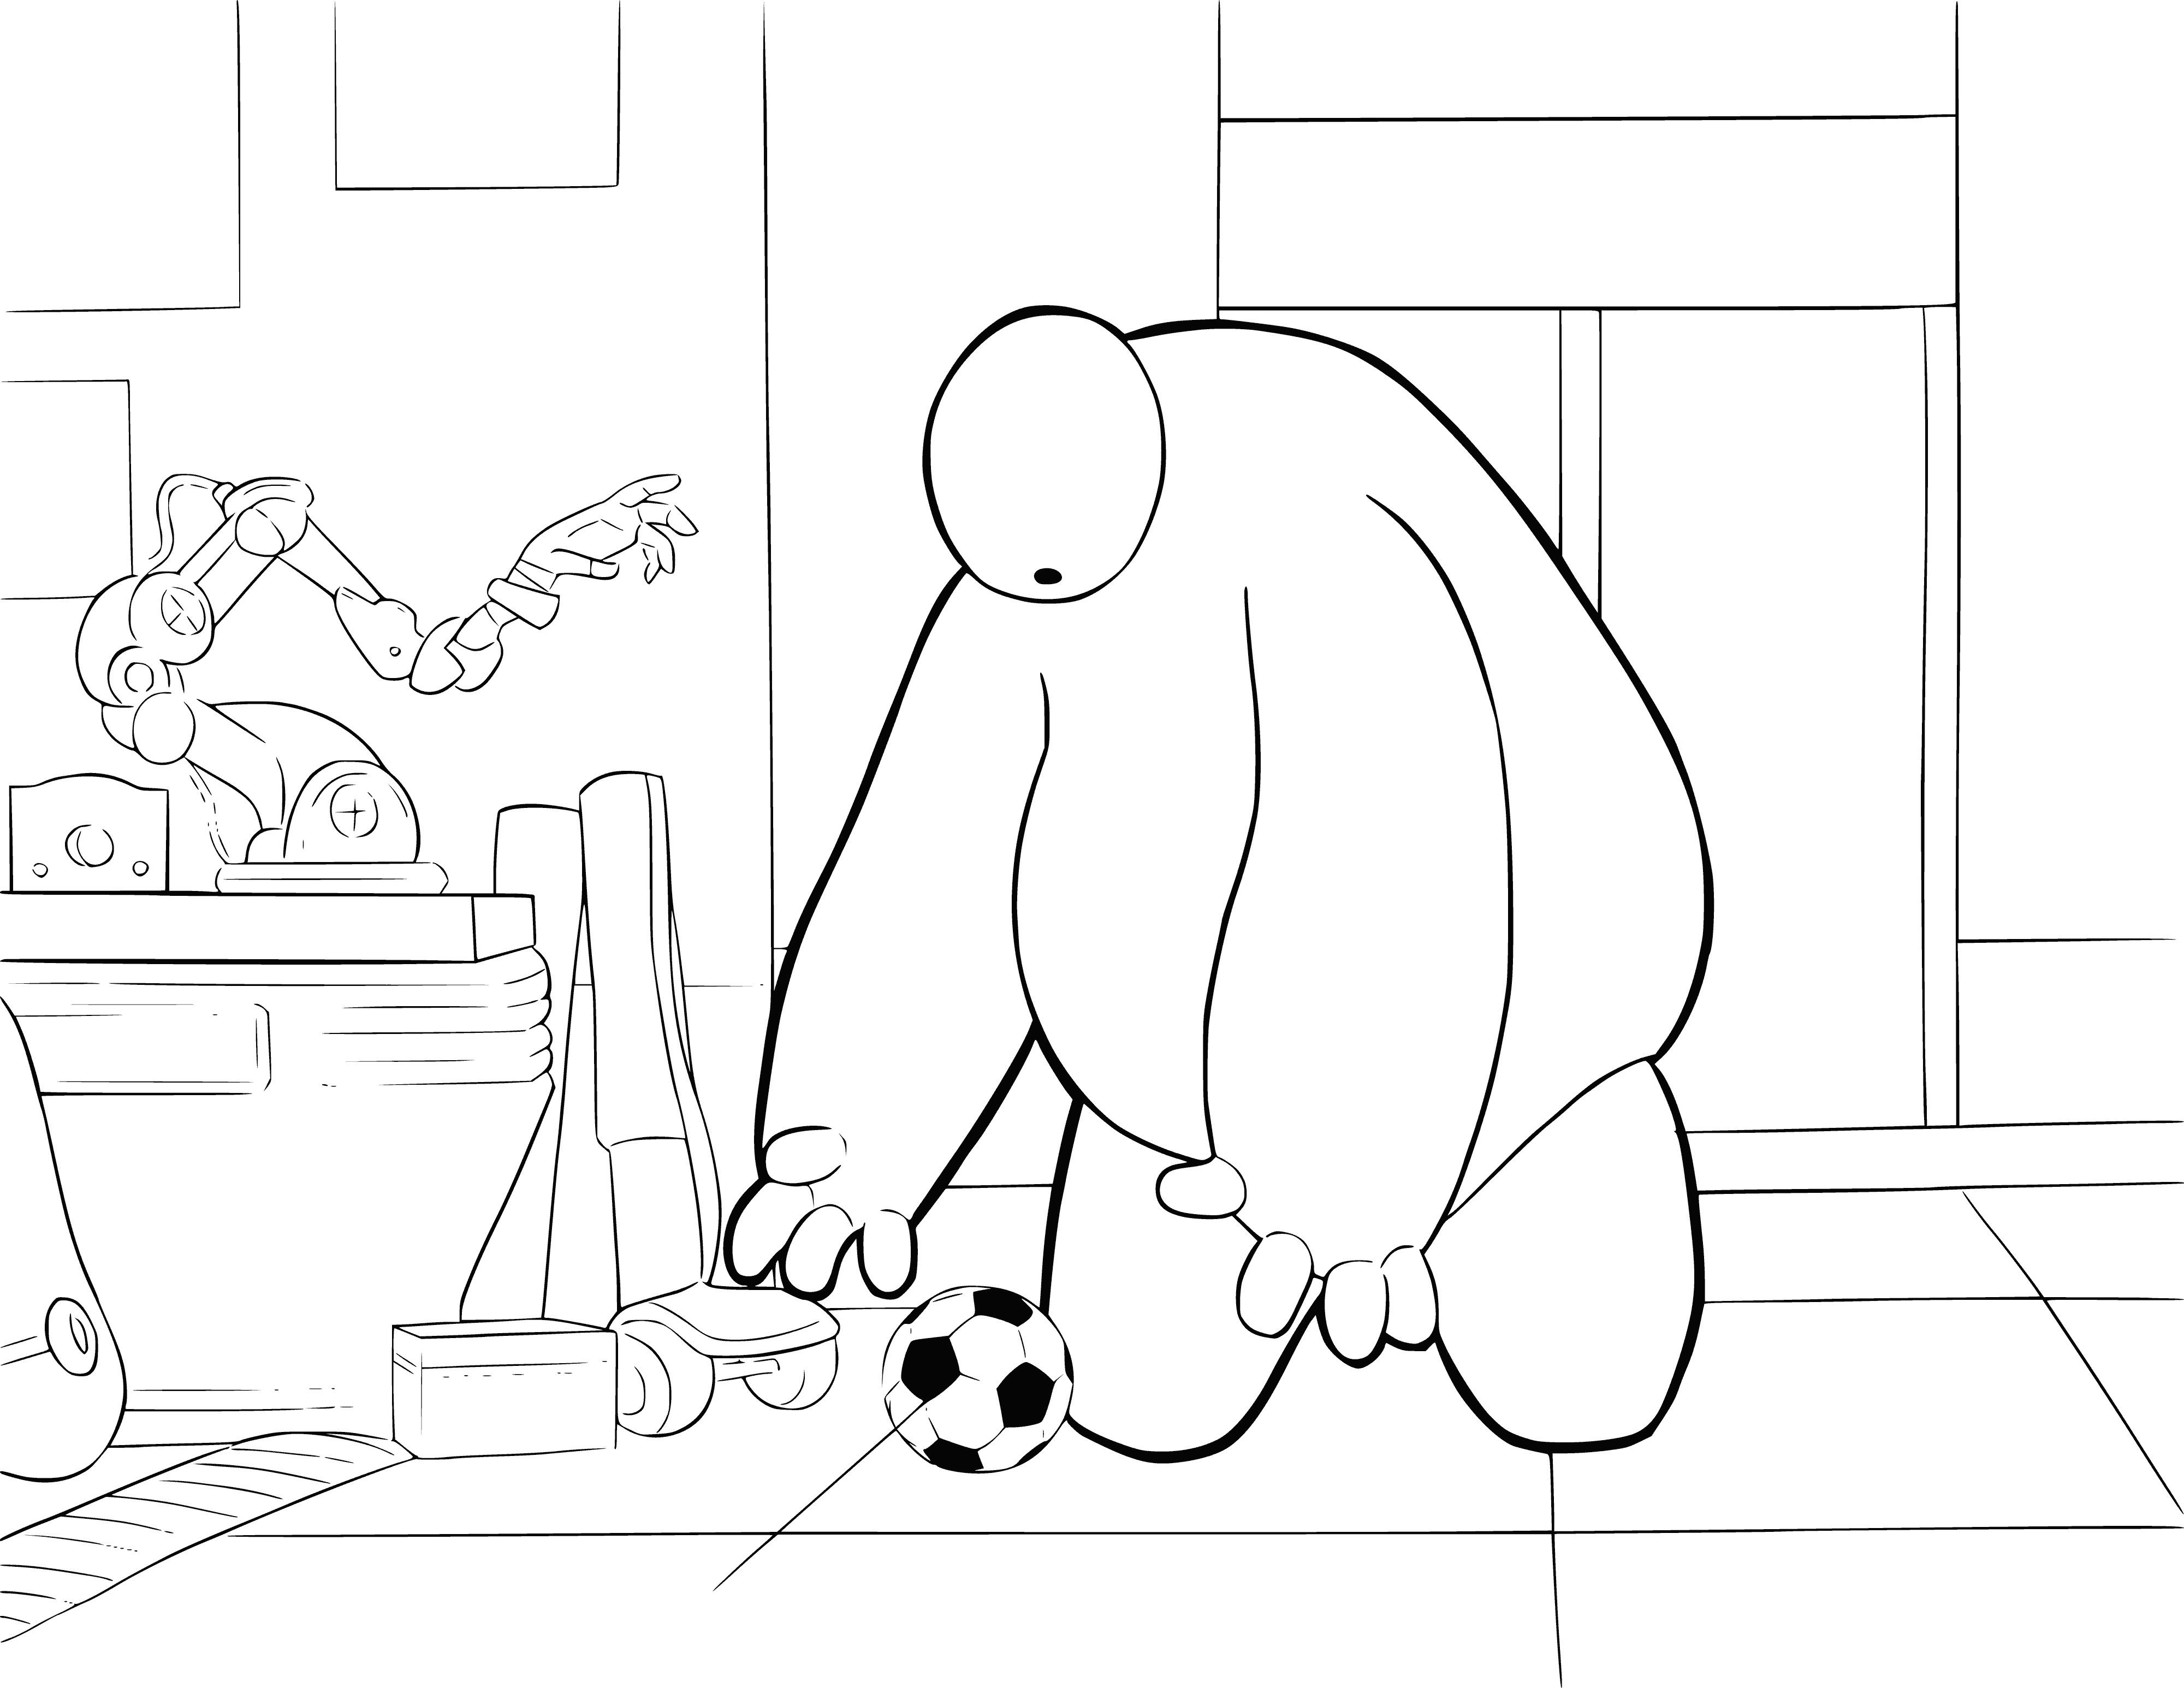 coloring page: White robot standing on checkerboard floor, left side has black table with white lamp, right side has white door w/ black doorknob.